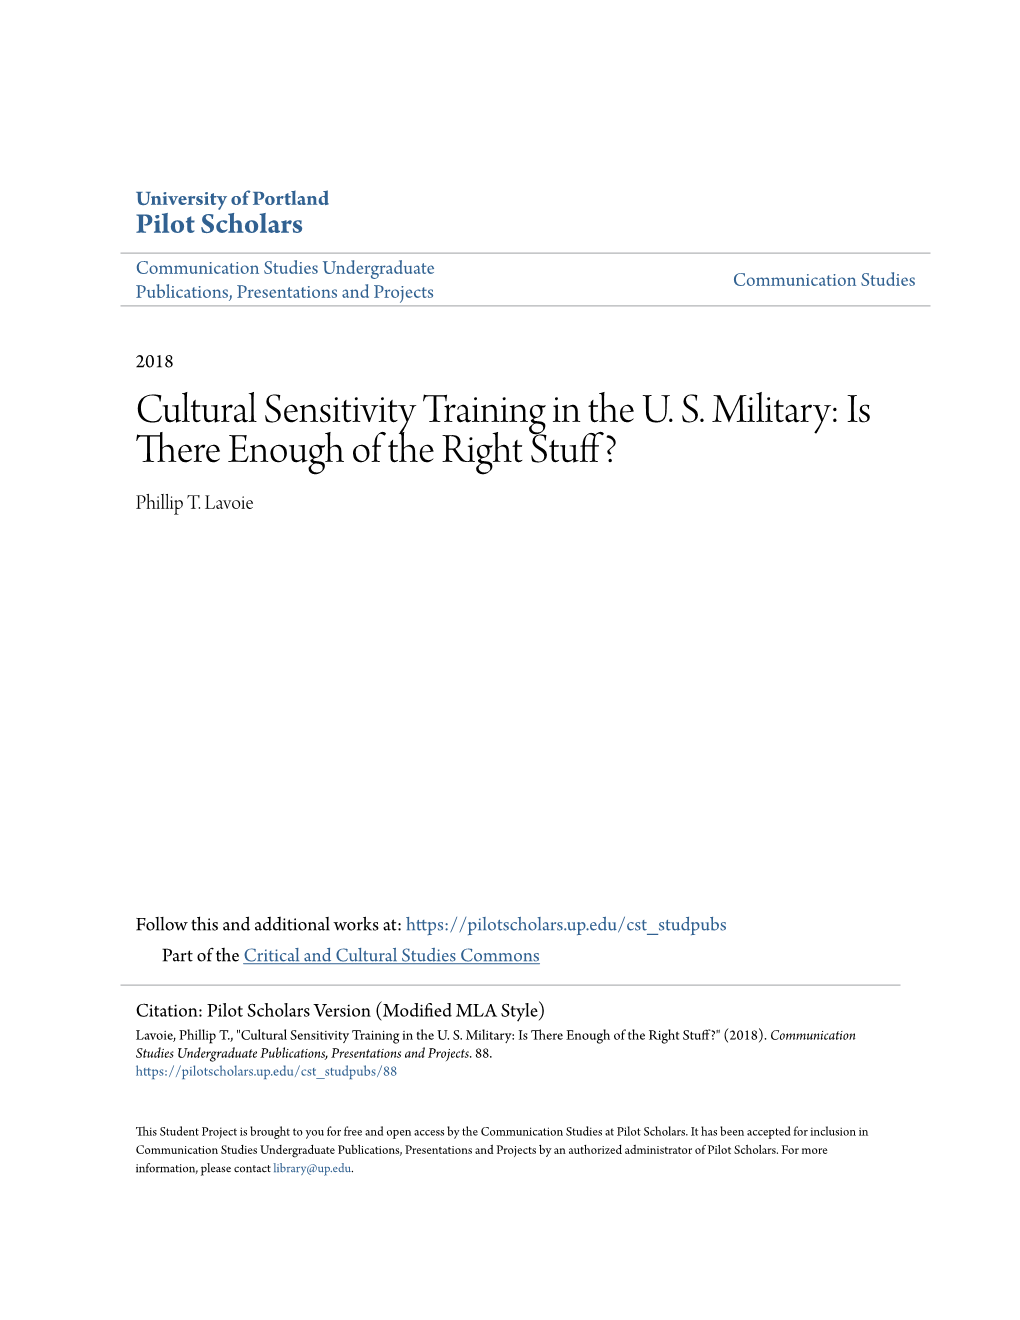 Cultural Sensitivity Training in the US Military